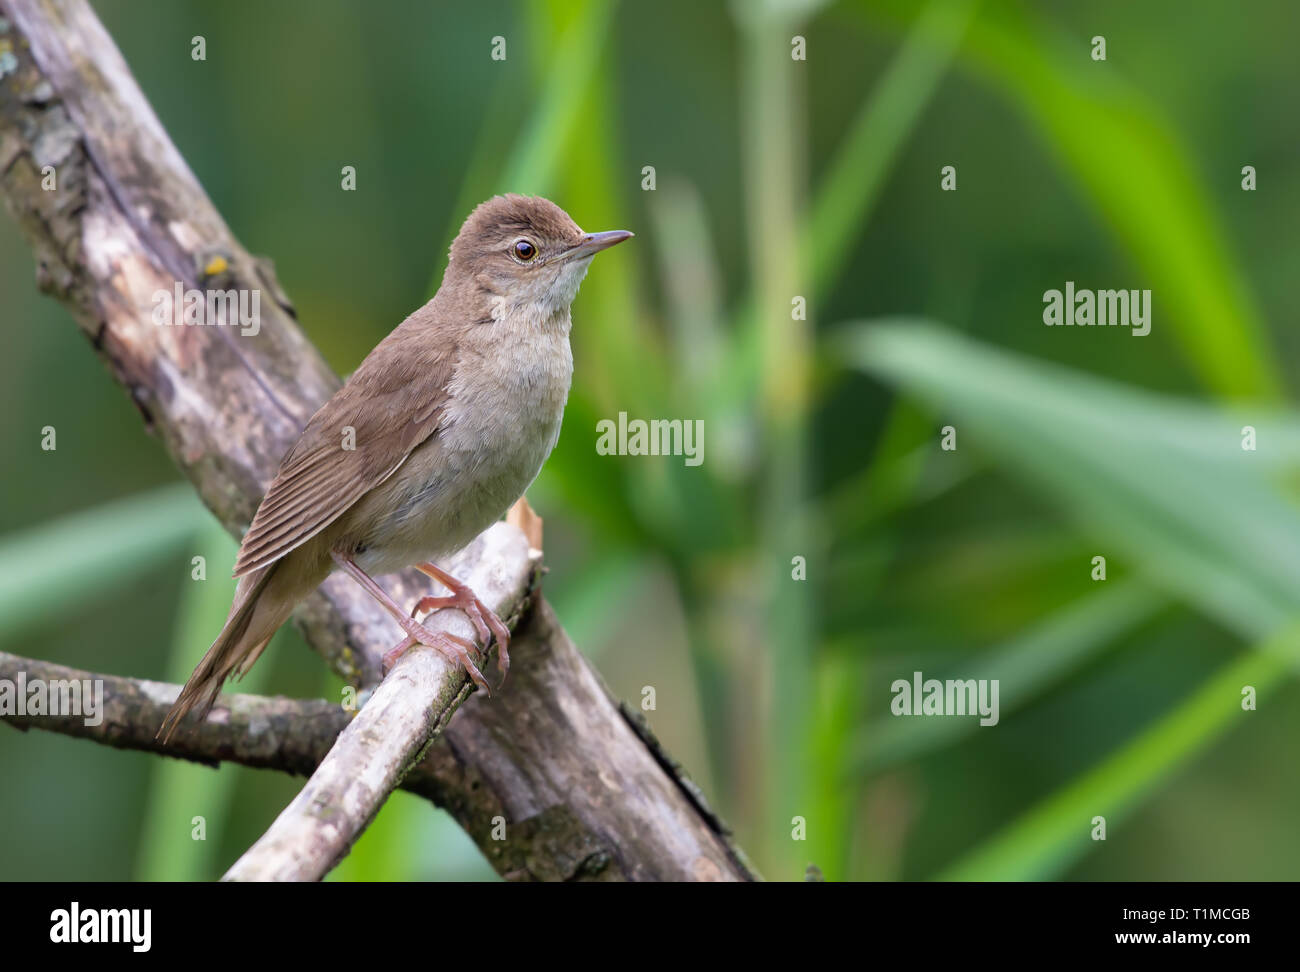 Adult Male Savi's warbler perched at an aged branch Stock Photo